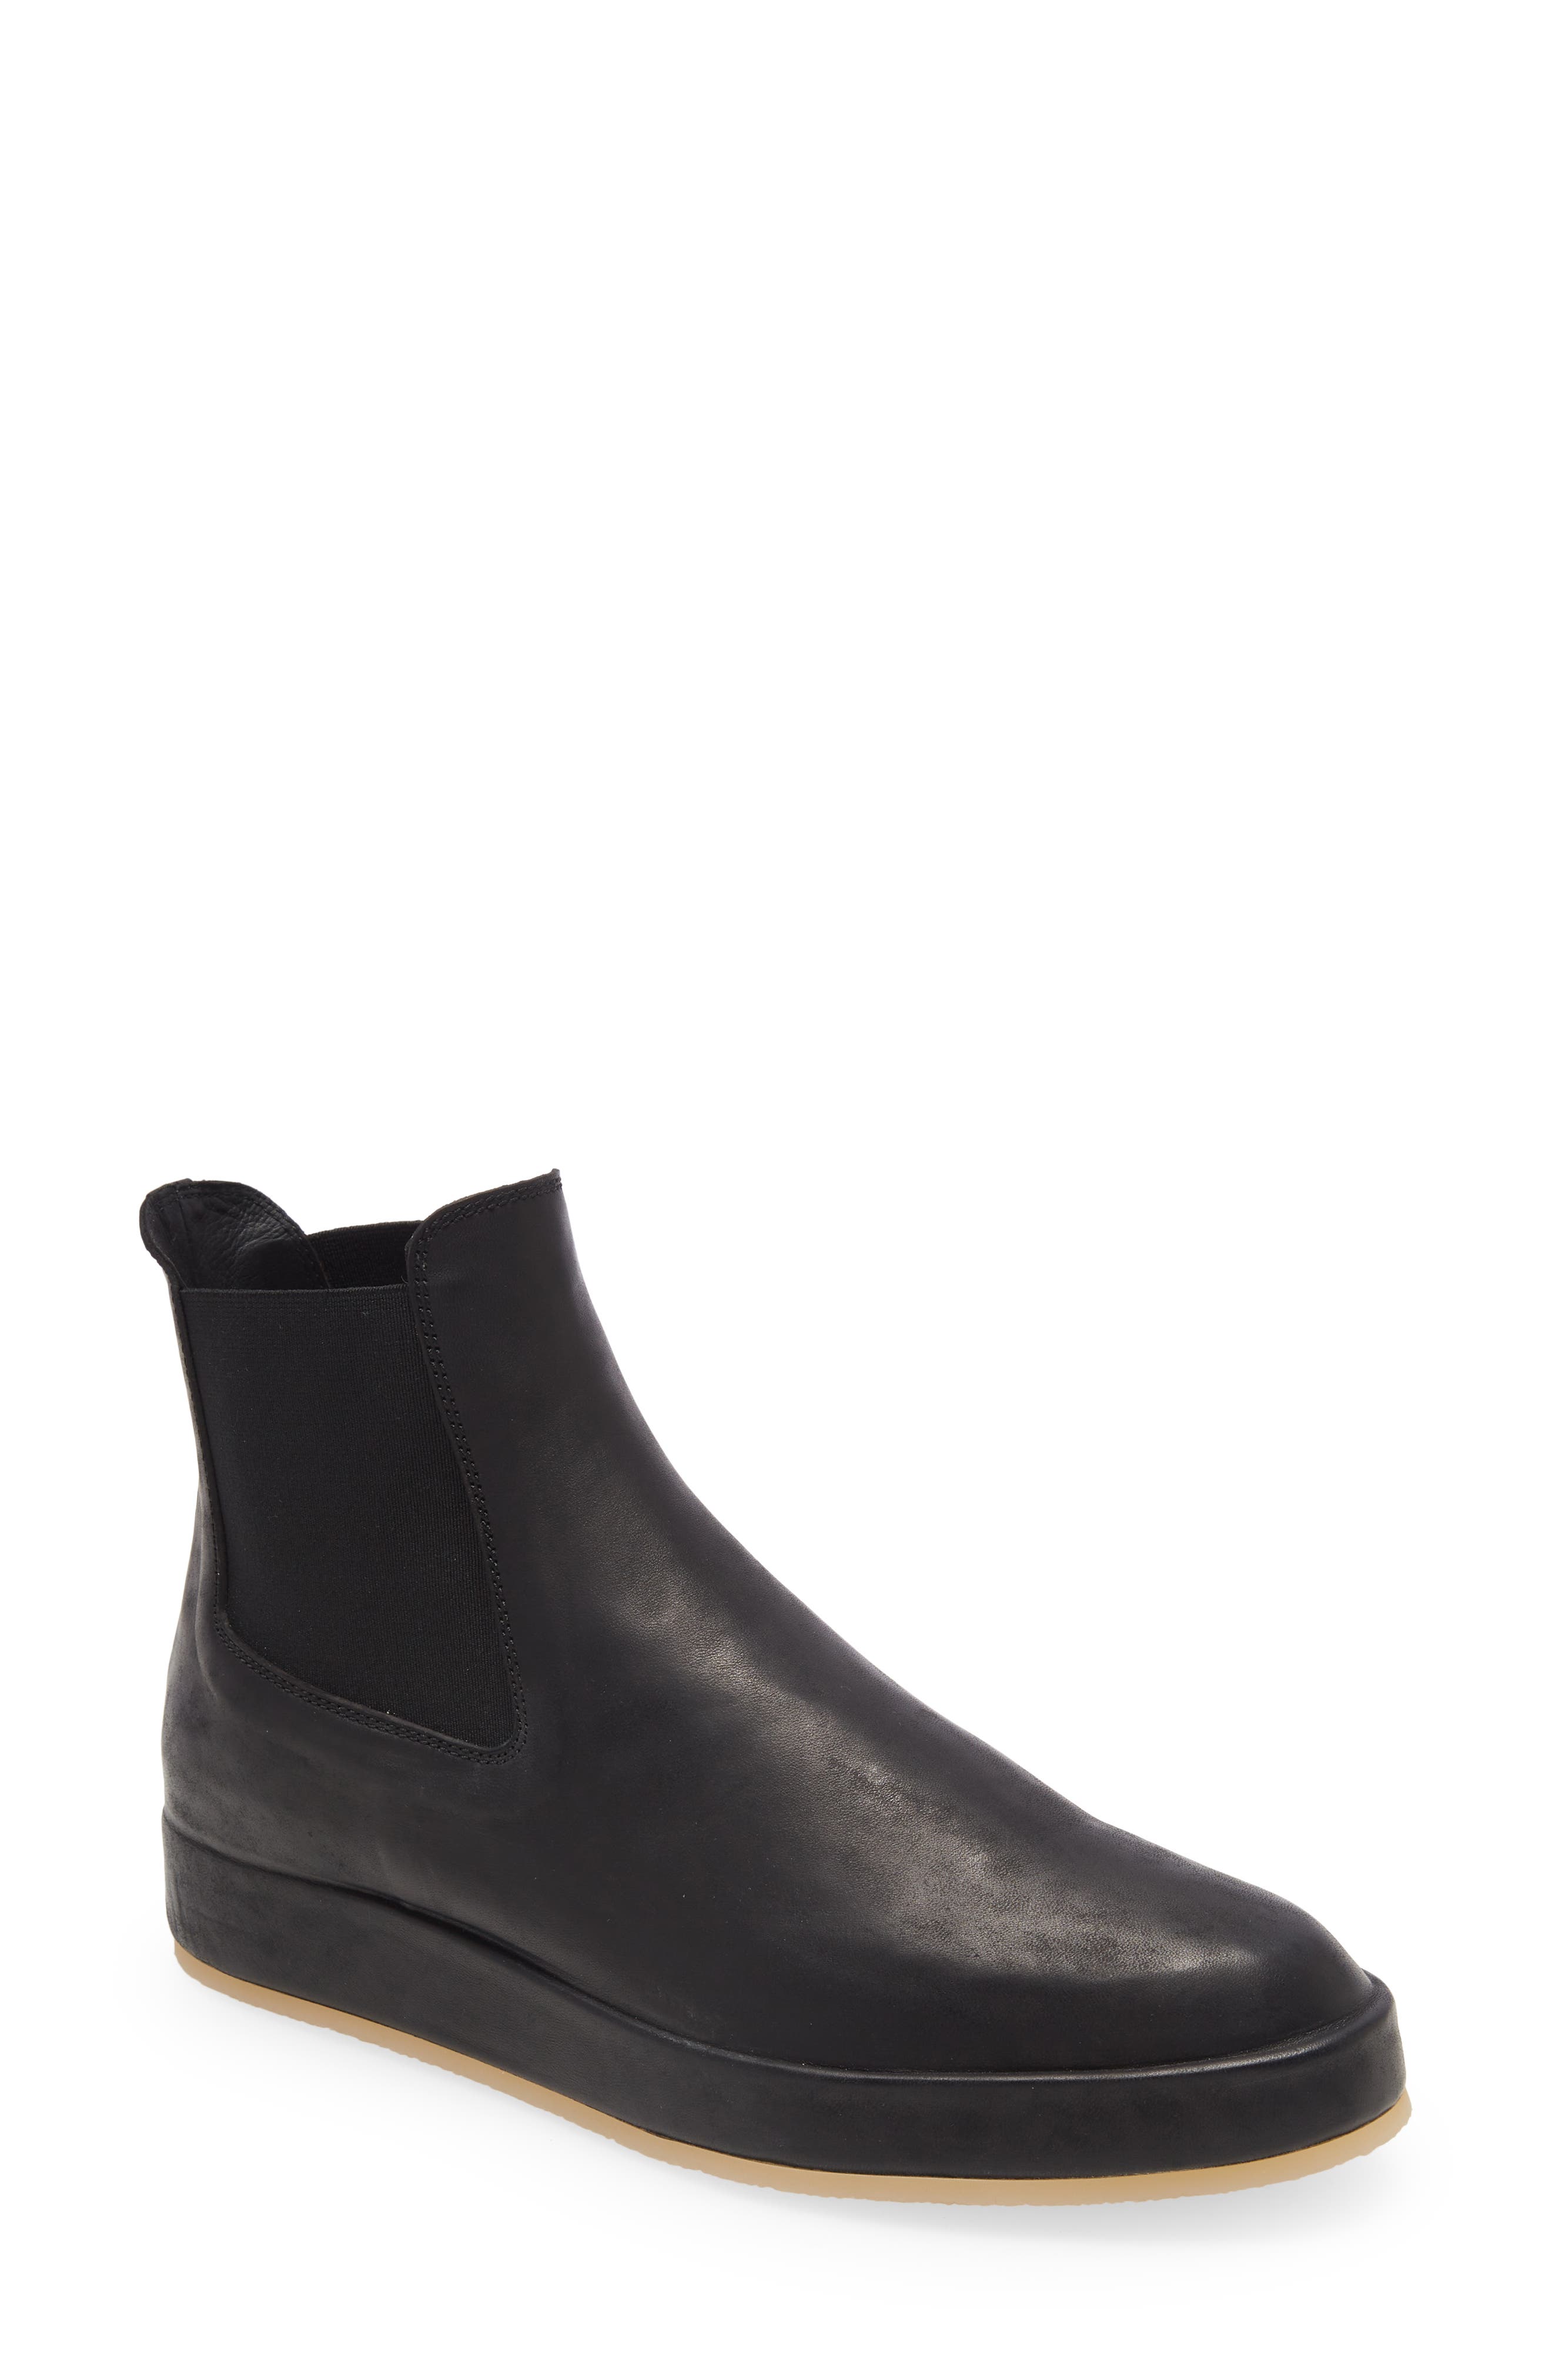 Fear of God Wrapped Chelsea Boot in Black at Nordstrom, Size 11Us